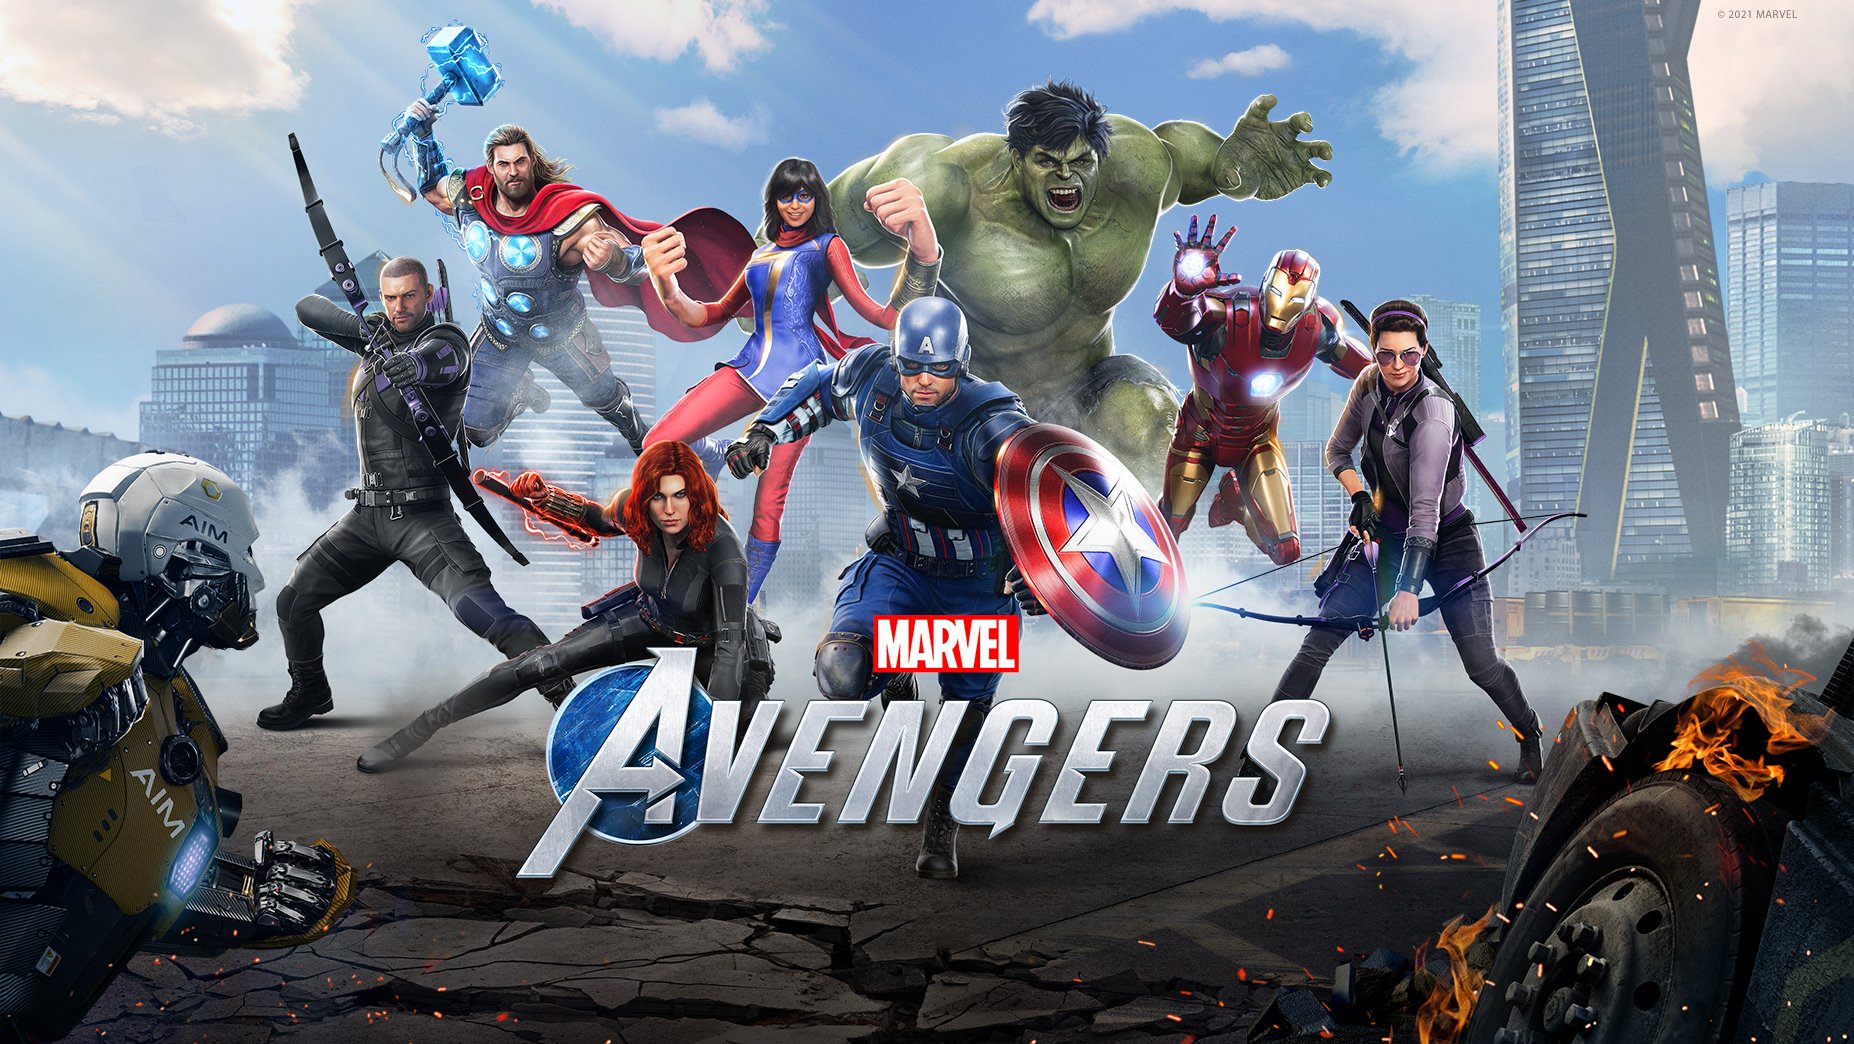 Marvel's Avengers Marvel's Avengers At No Cost During The All Access Weekend From July 29 1 On PS PS Steam, And Stadia! The Base Game Along With Post Launch